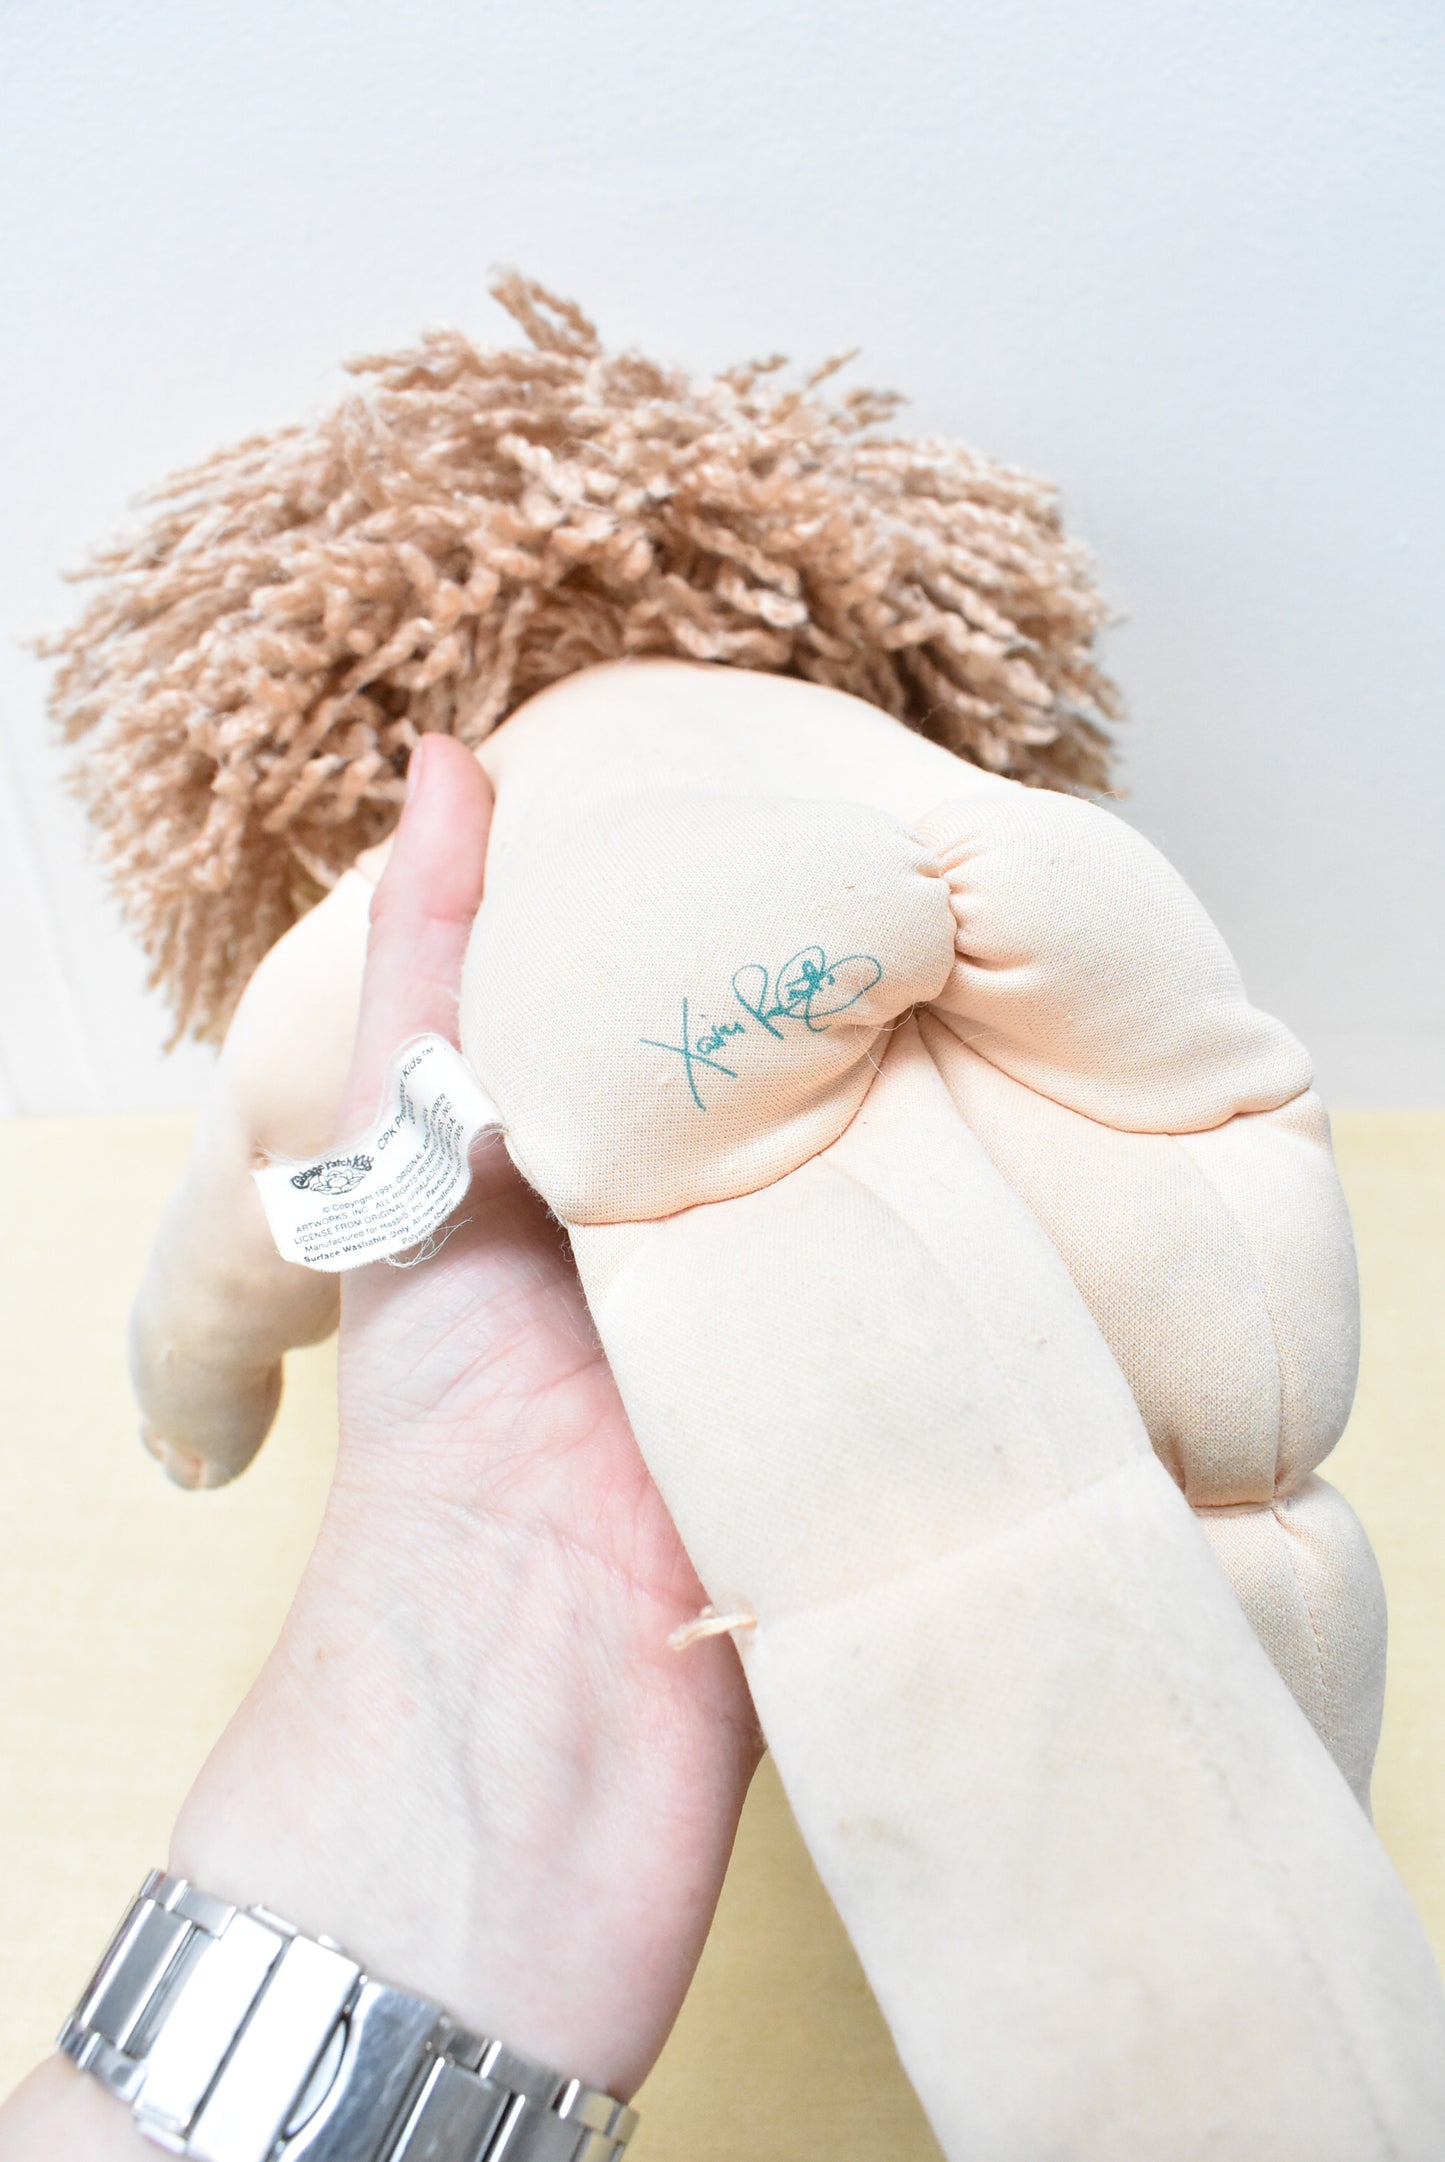 1980's Cabbage Patch doll, signature of Xavier Roberts